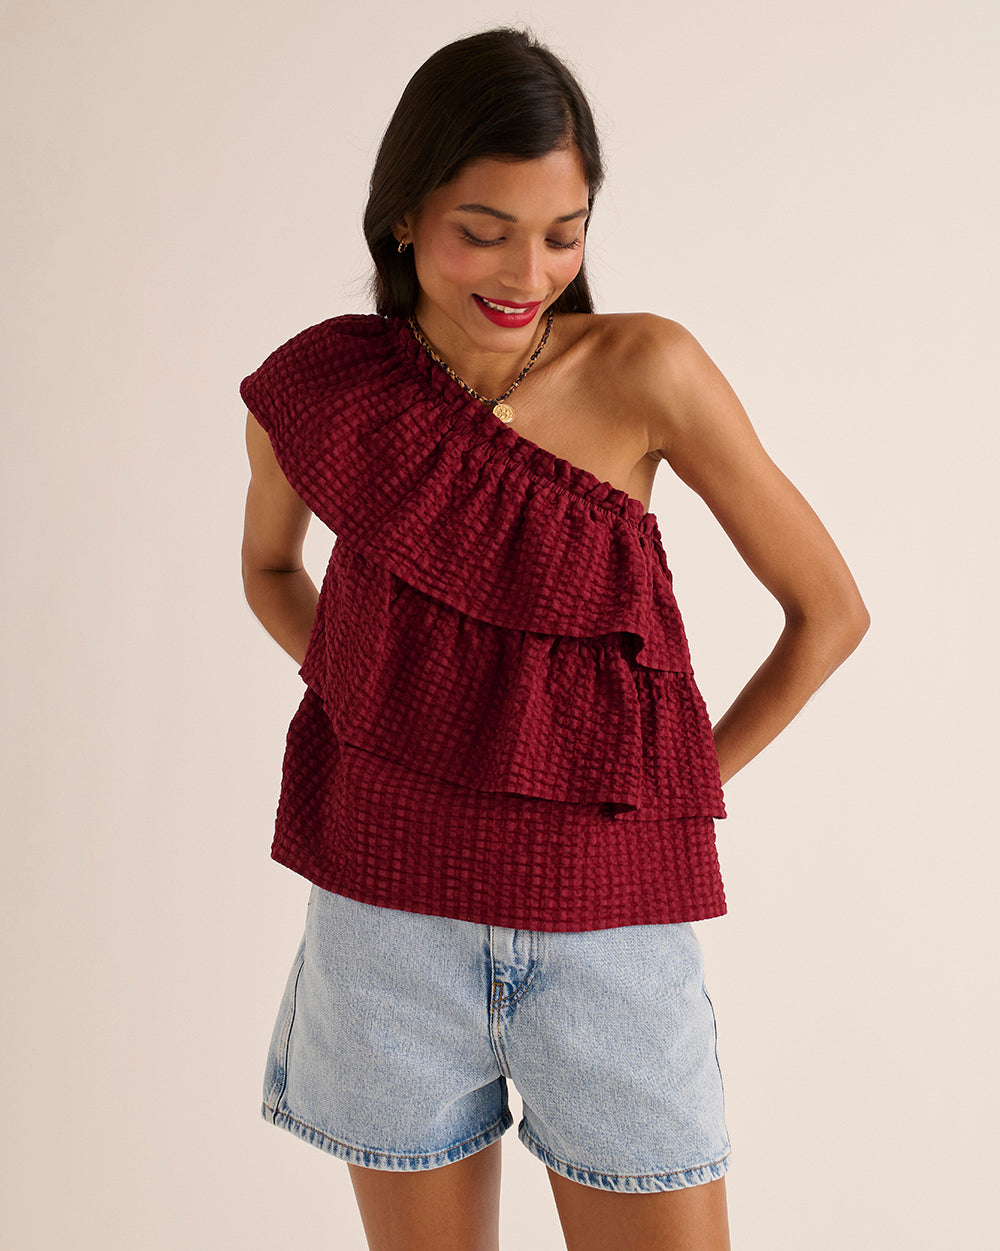 Top Lily of the valley gingham burgundy